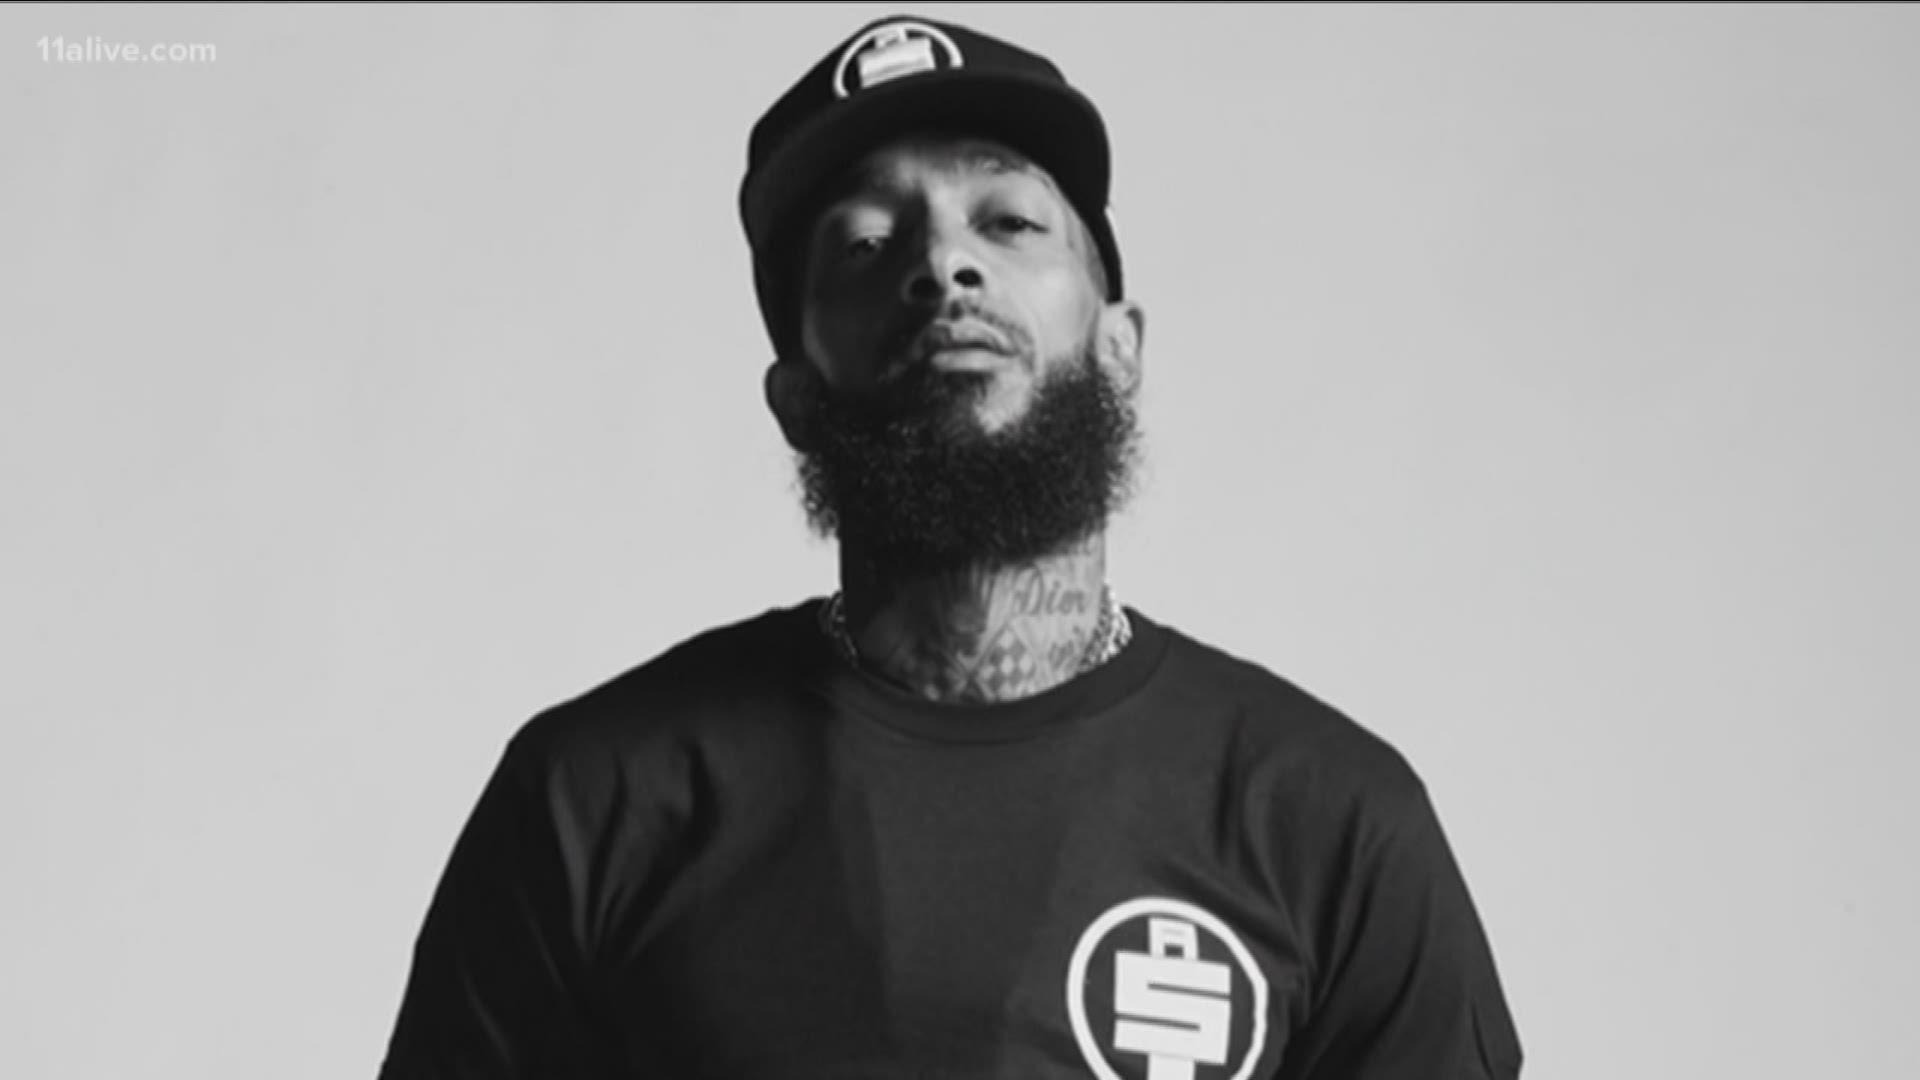 The manager at "Black Ink Atlanta", a tattoo parlor, said the day after Hussle died there was a line out the door with people wanting to honor the community leader with permanent body art.